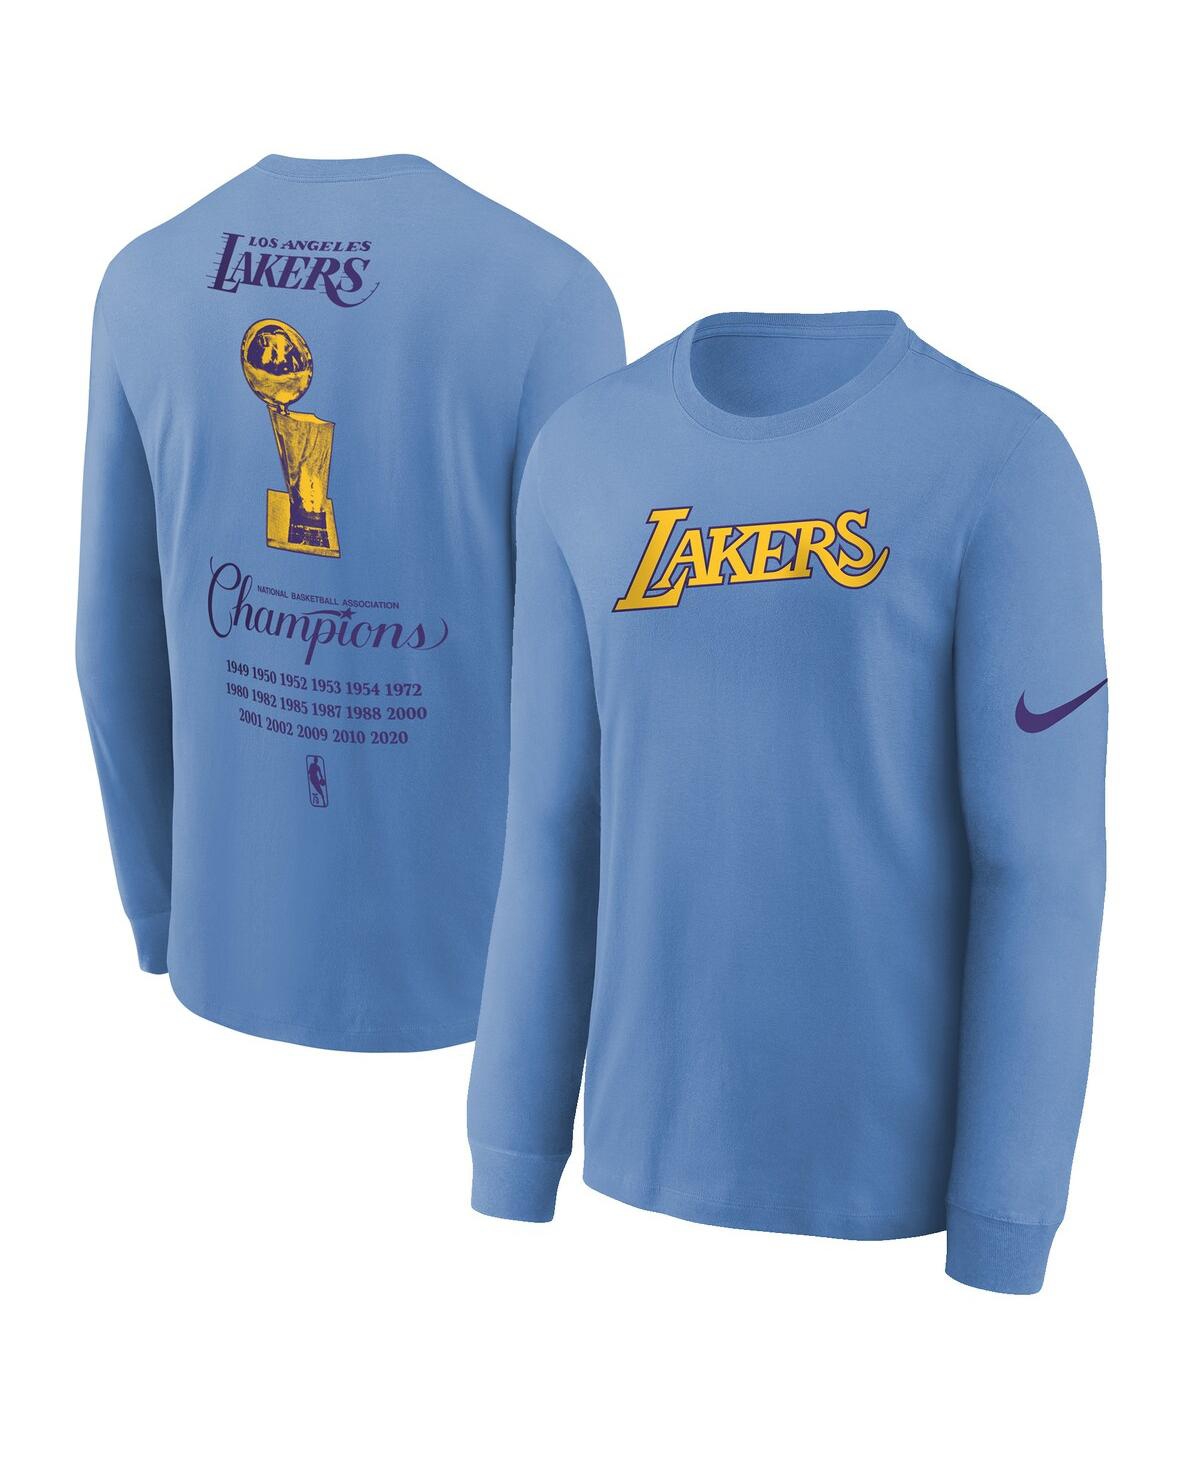 Nike Youth Boys Light Blue Los Angeles Lakers 2021/22 City Edition ...